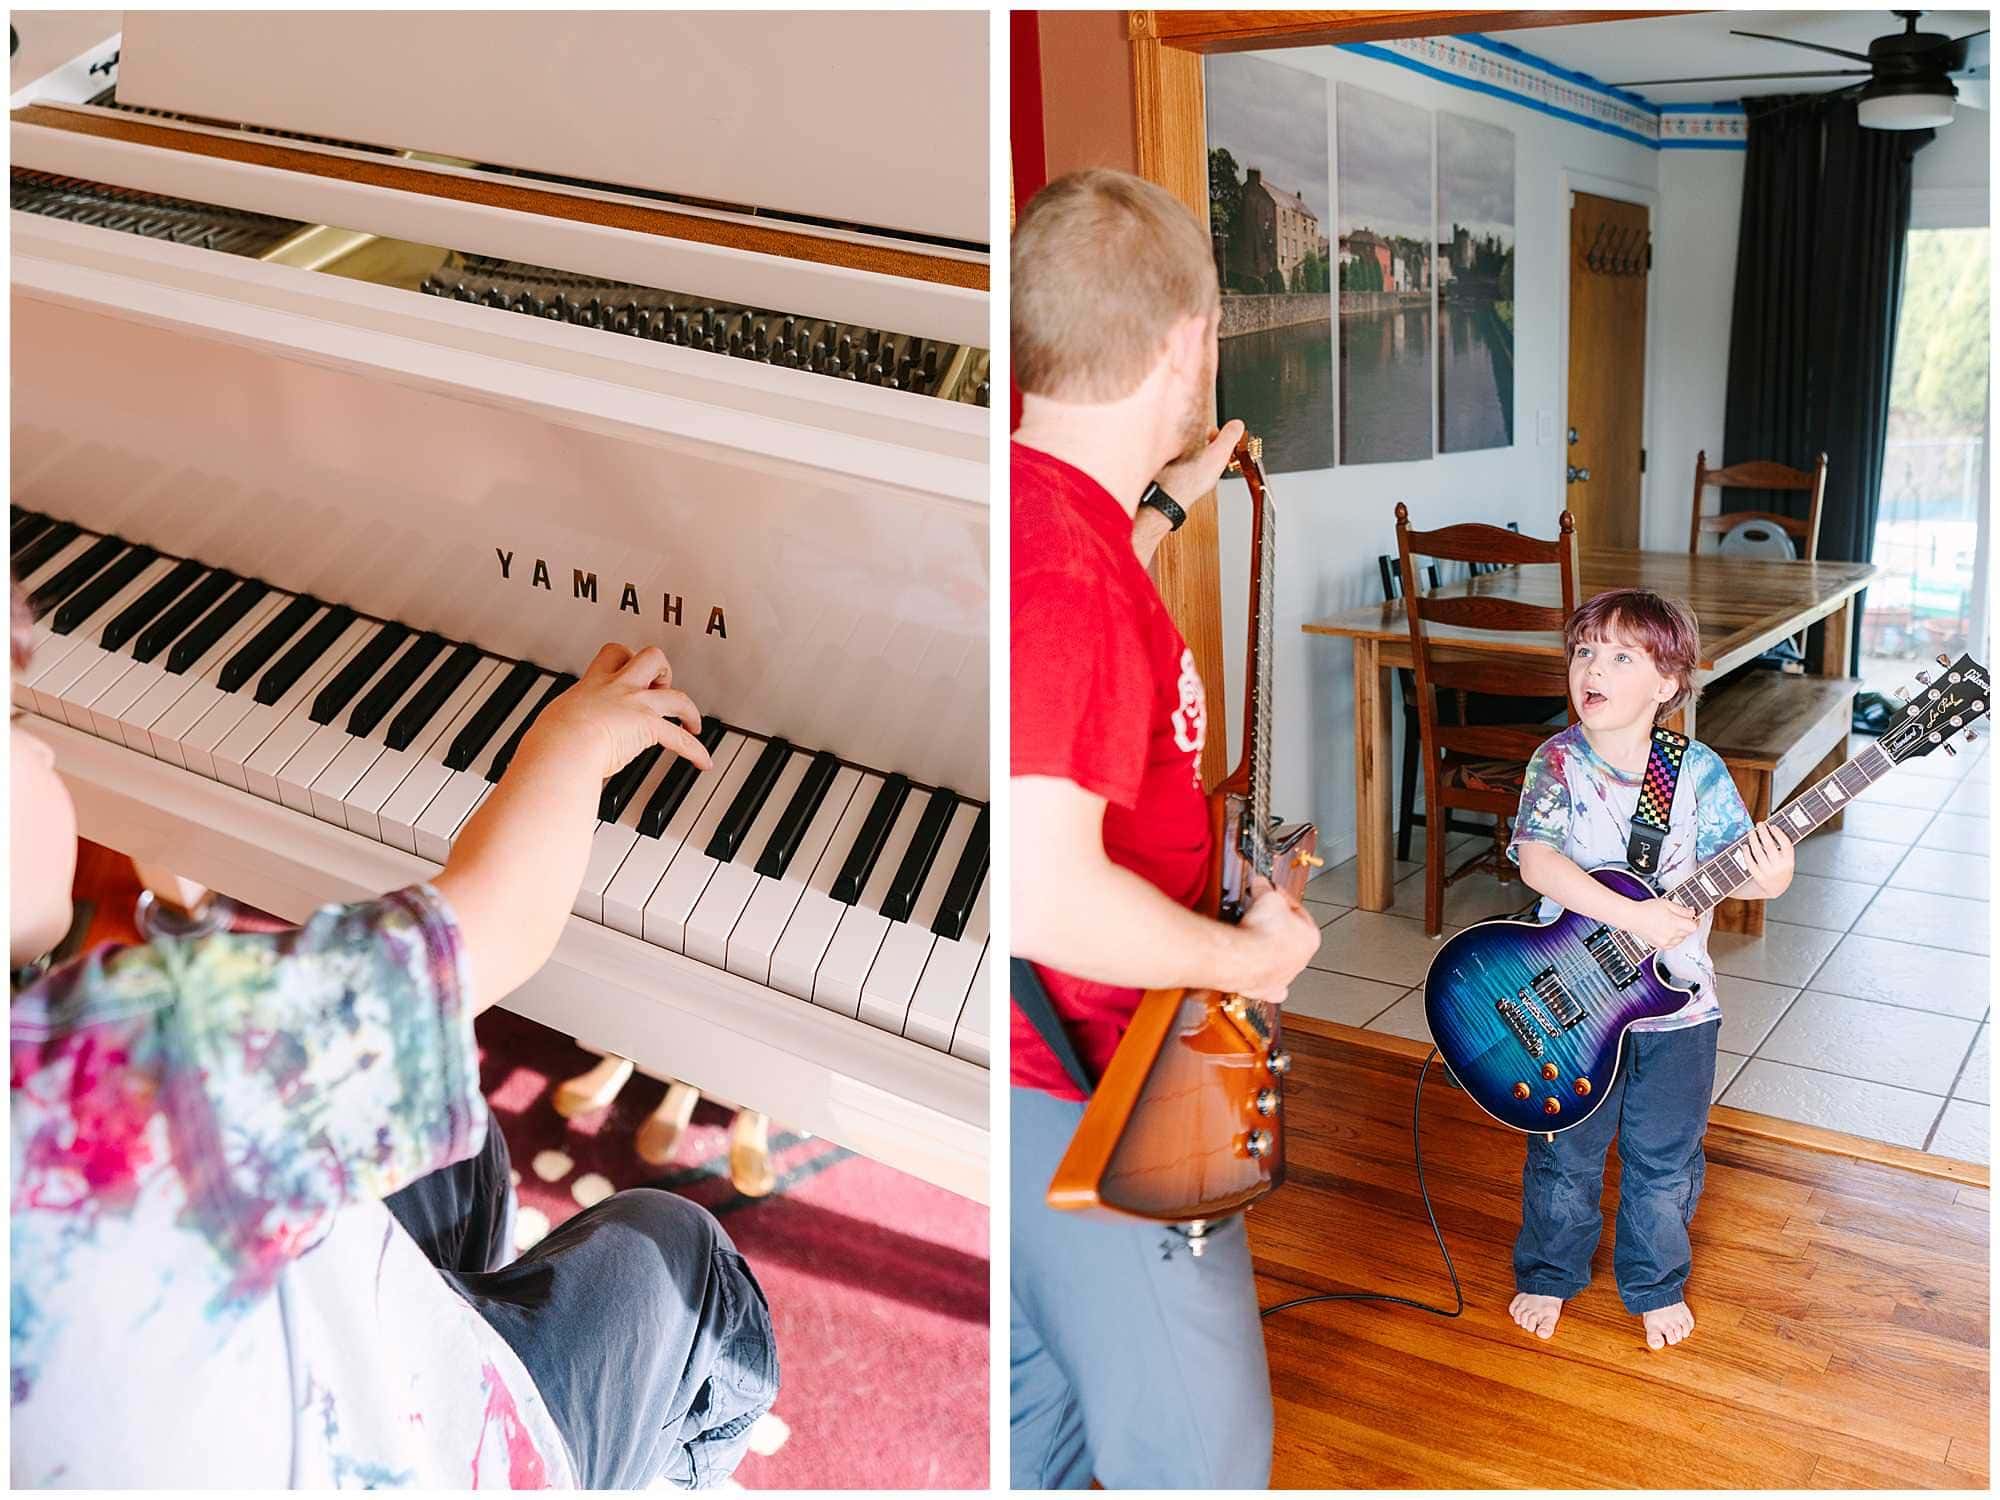 A boy plays a white Yamaha piano in his living room in Columbus Ohio